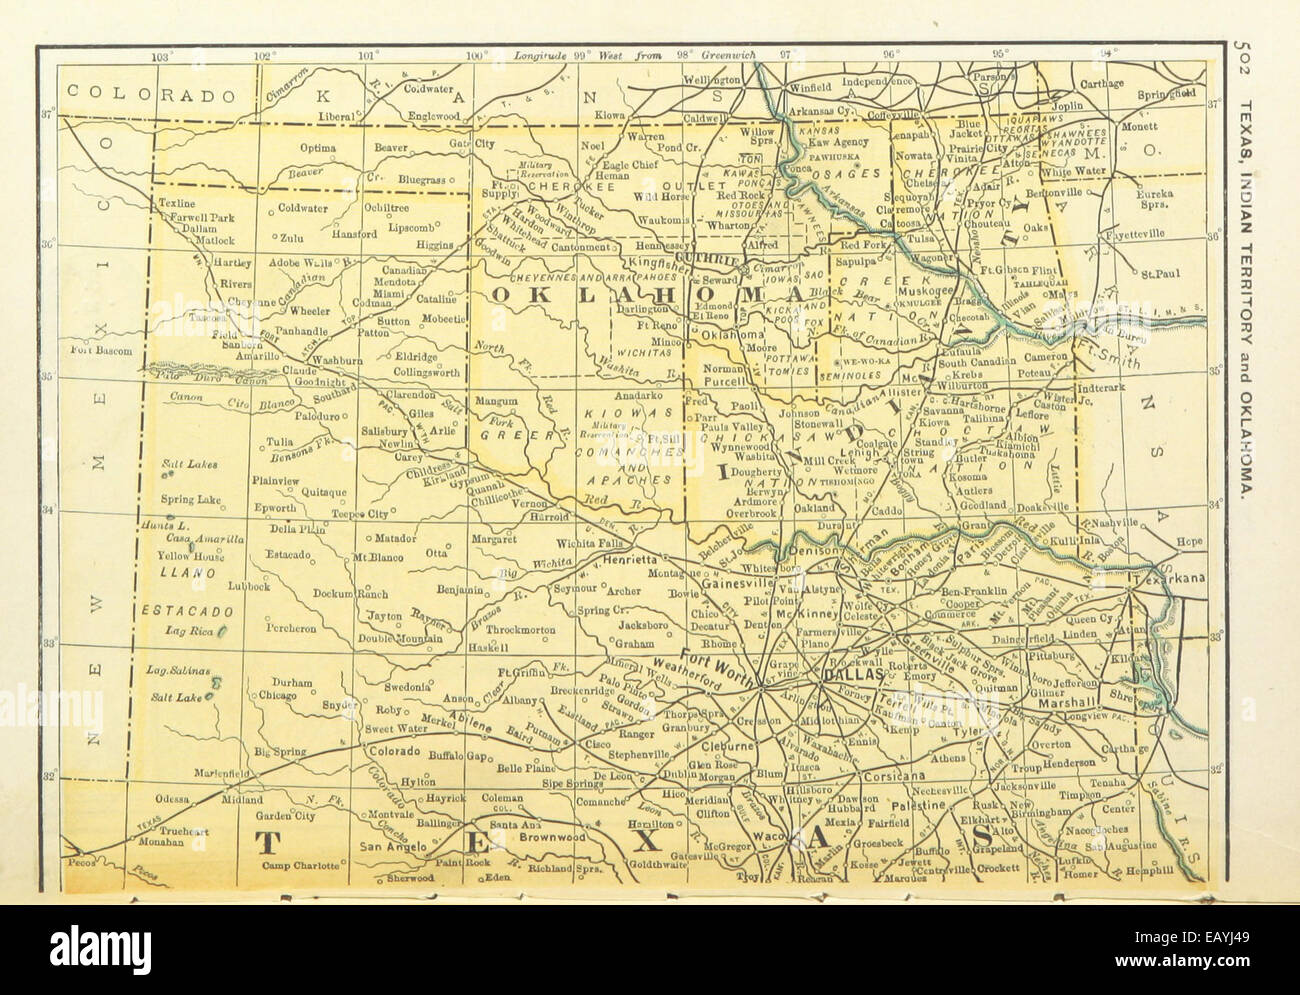 US-MAPS(1891) p504 - MAP OF TEXAS, OKLAHOMA AND INDIAN TERRITORY (l) Stock Photo